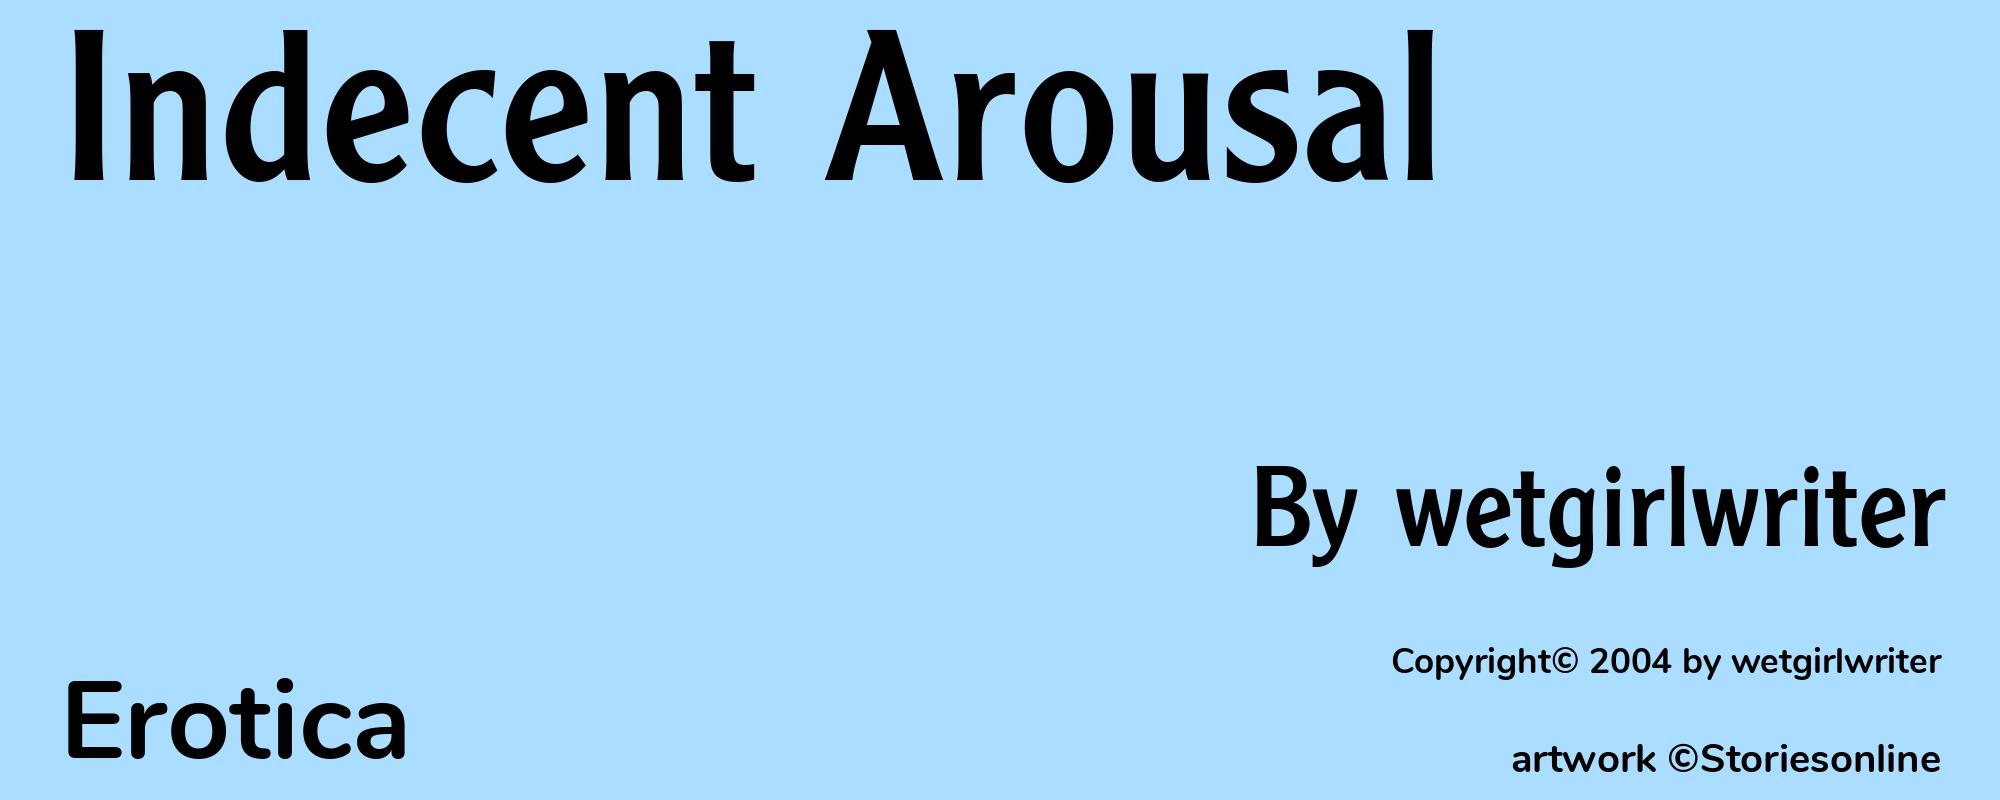 Indecent Arousal - Cover